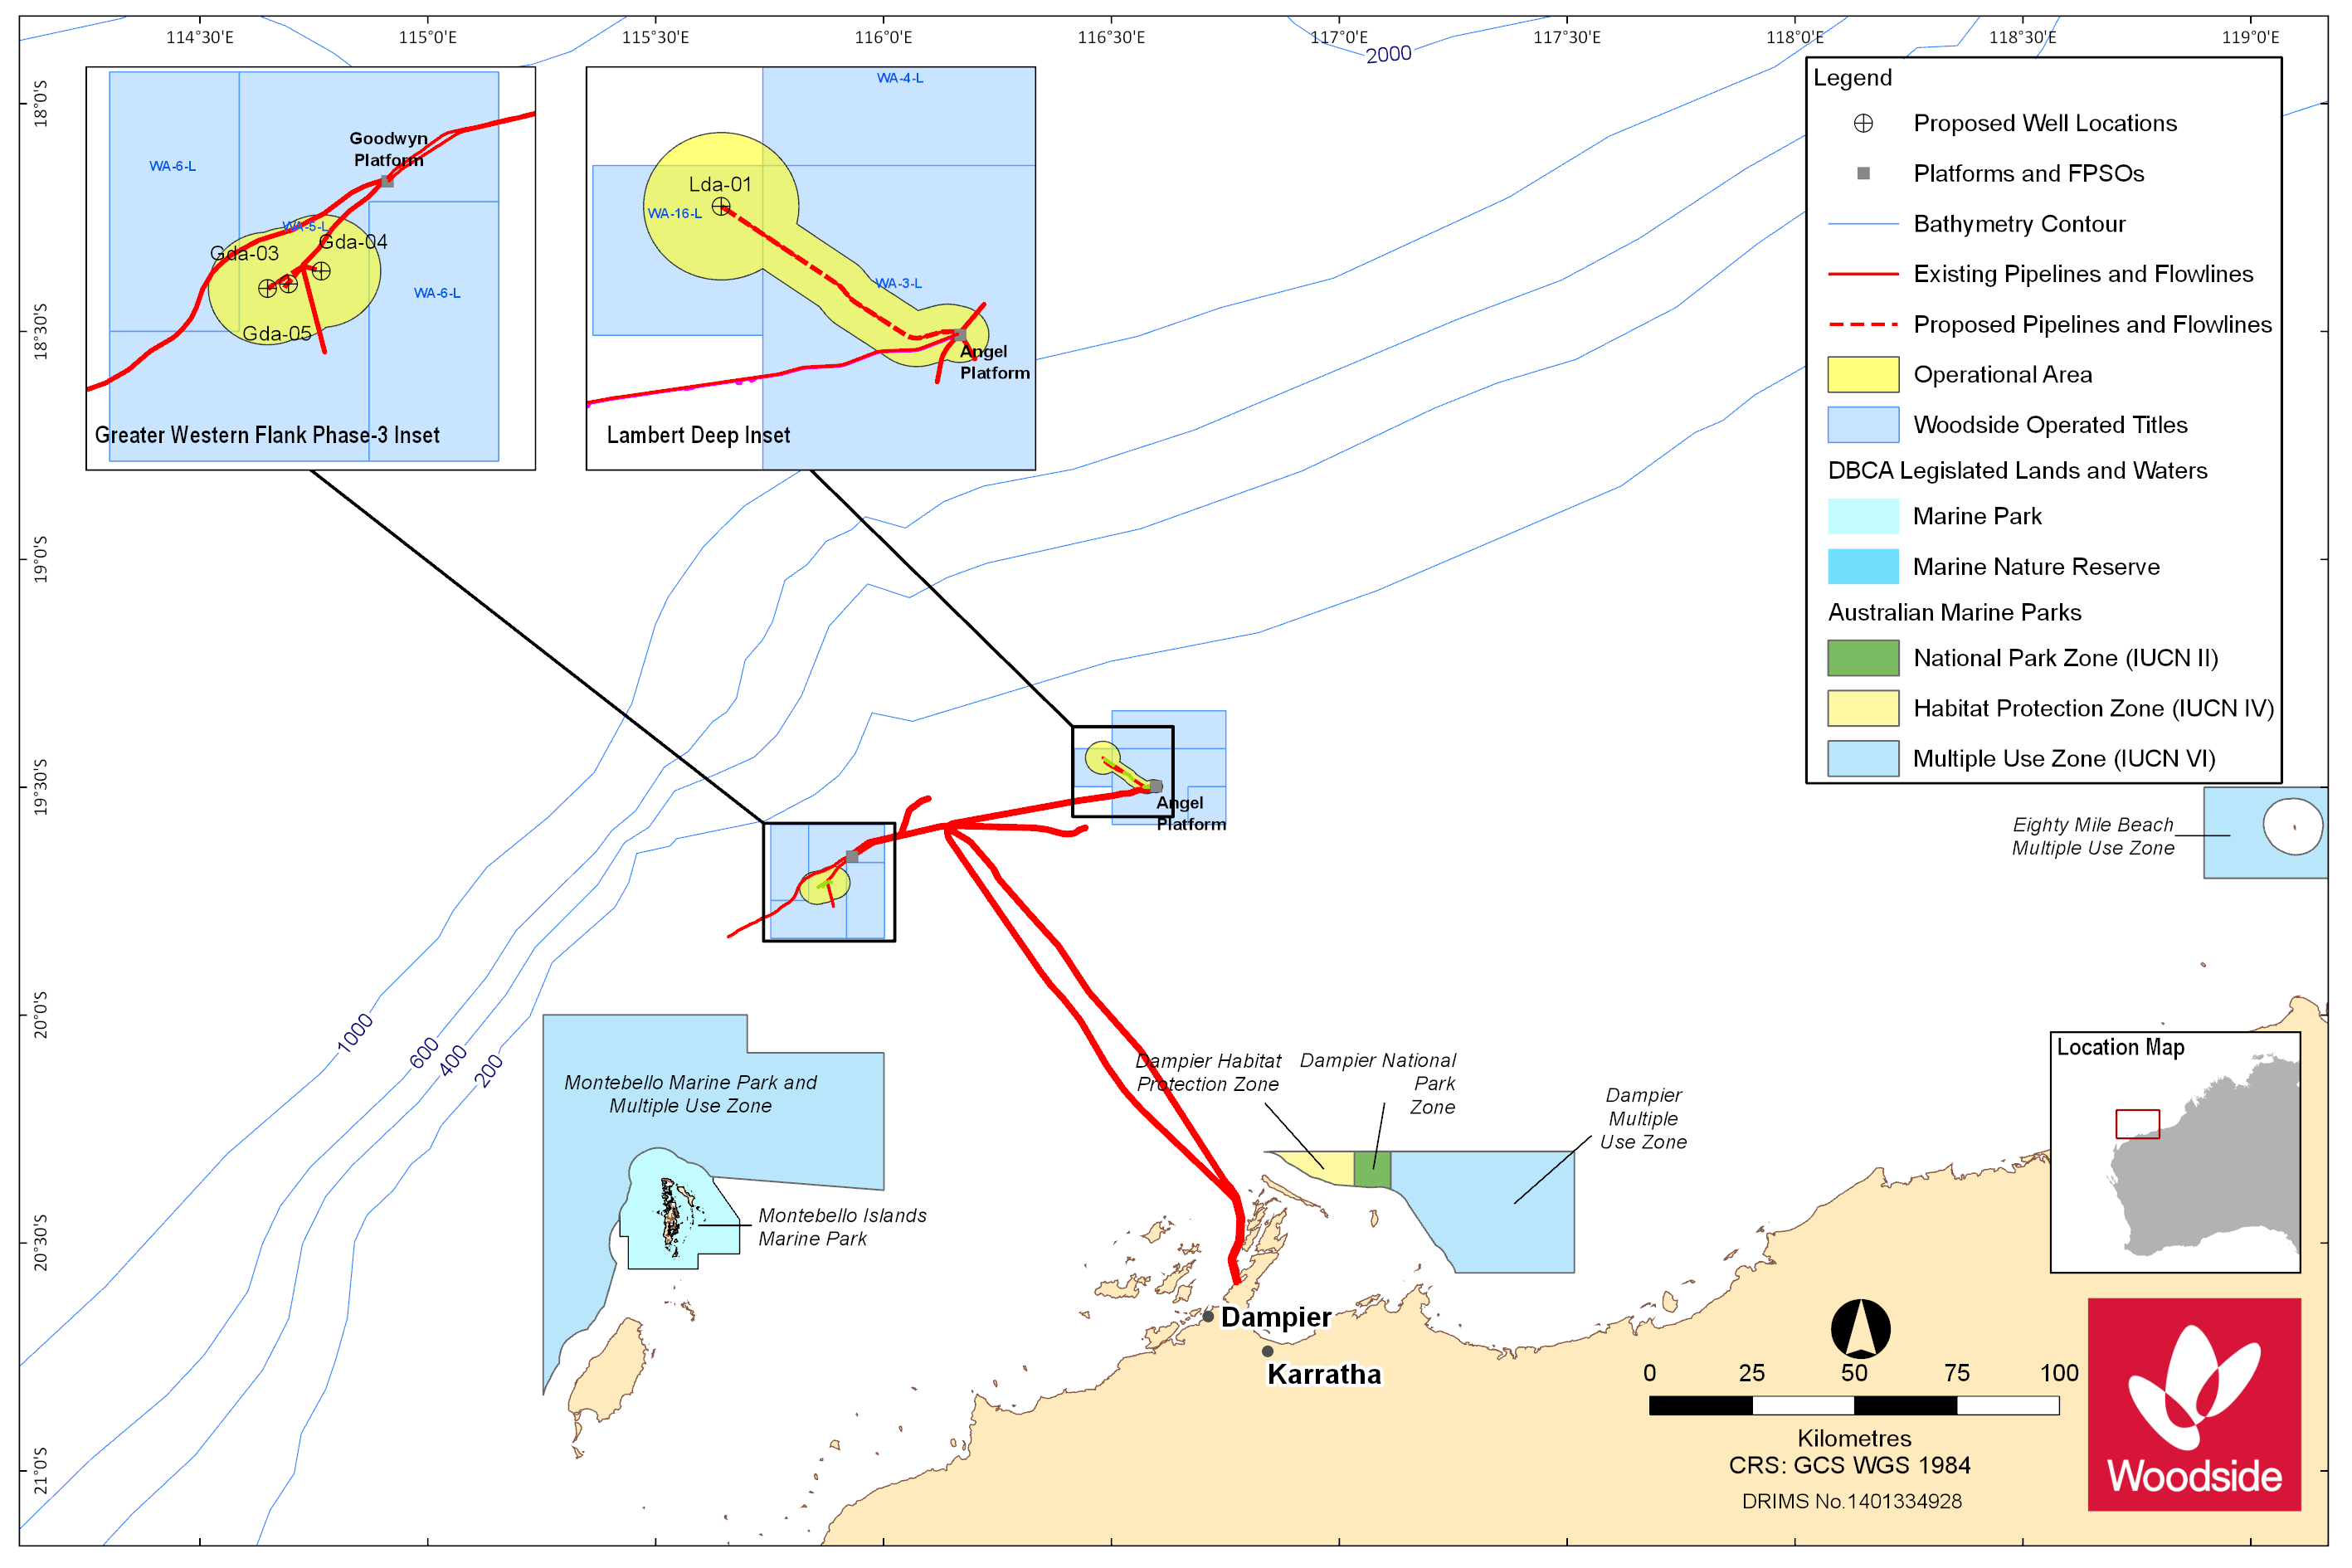 Location map - Activity: Greater Western Flank 3 and Lambert Deep Drilling and Subsea Installation (refer to description)